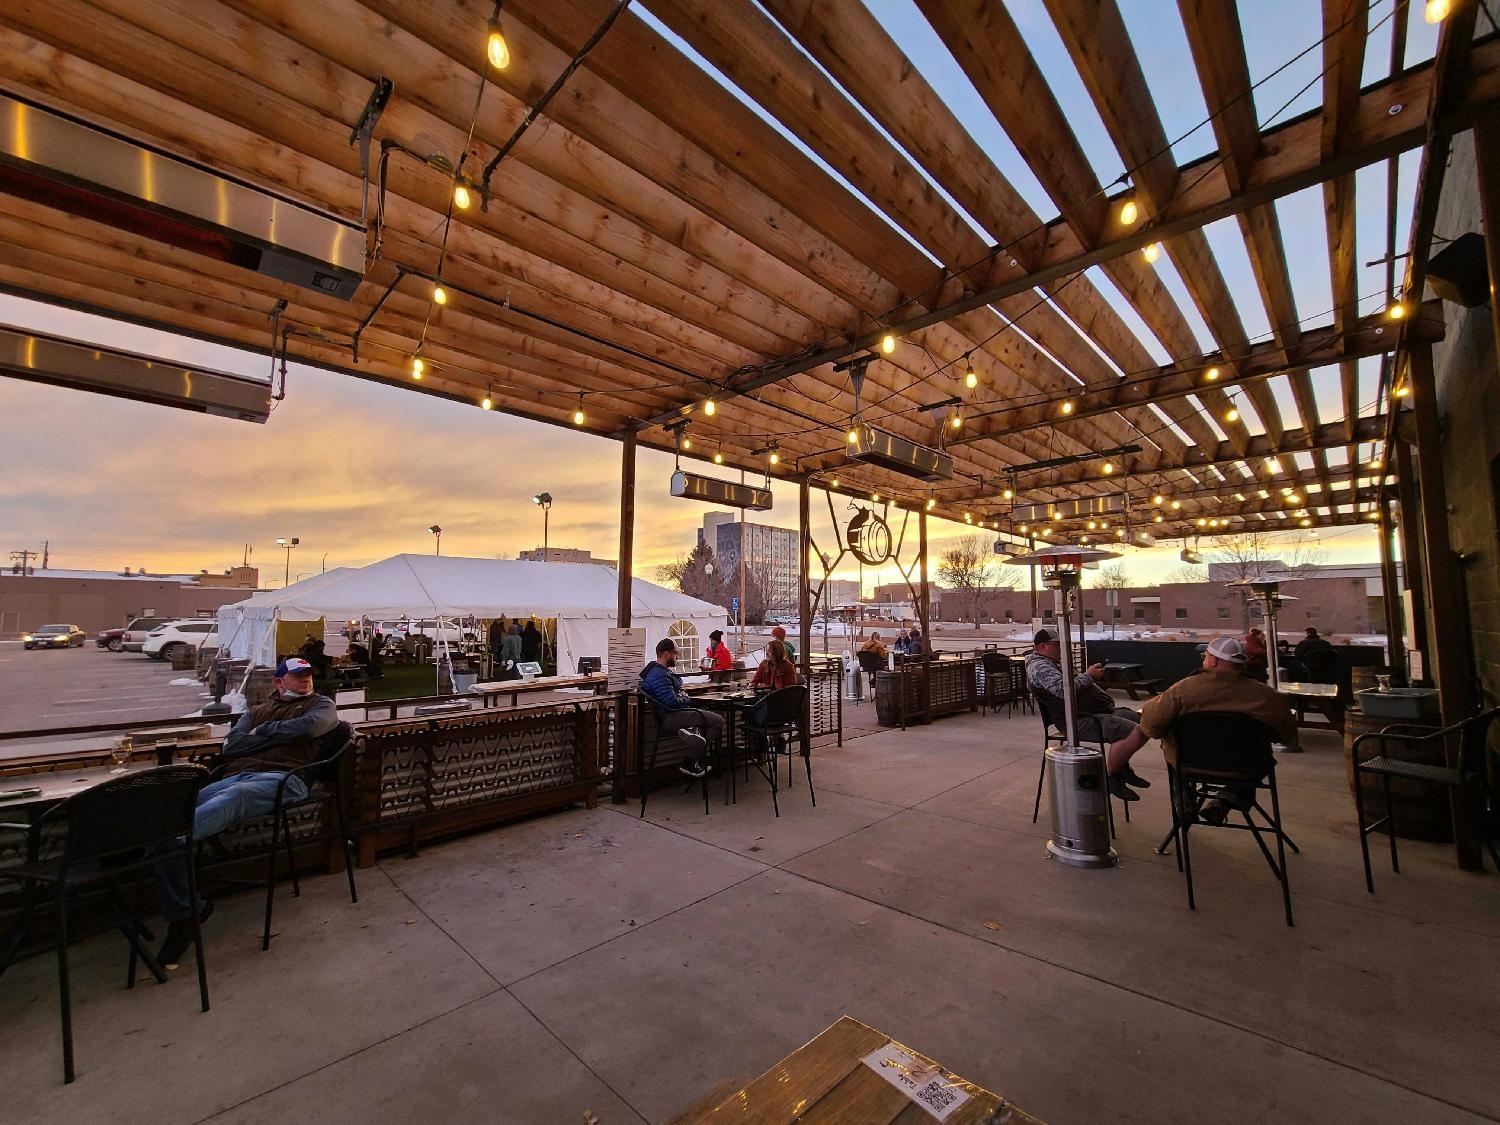 View of the Colorado sunset from the WeldWerks patio at dusk.